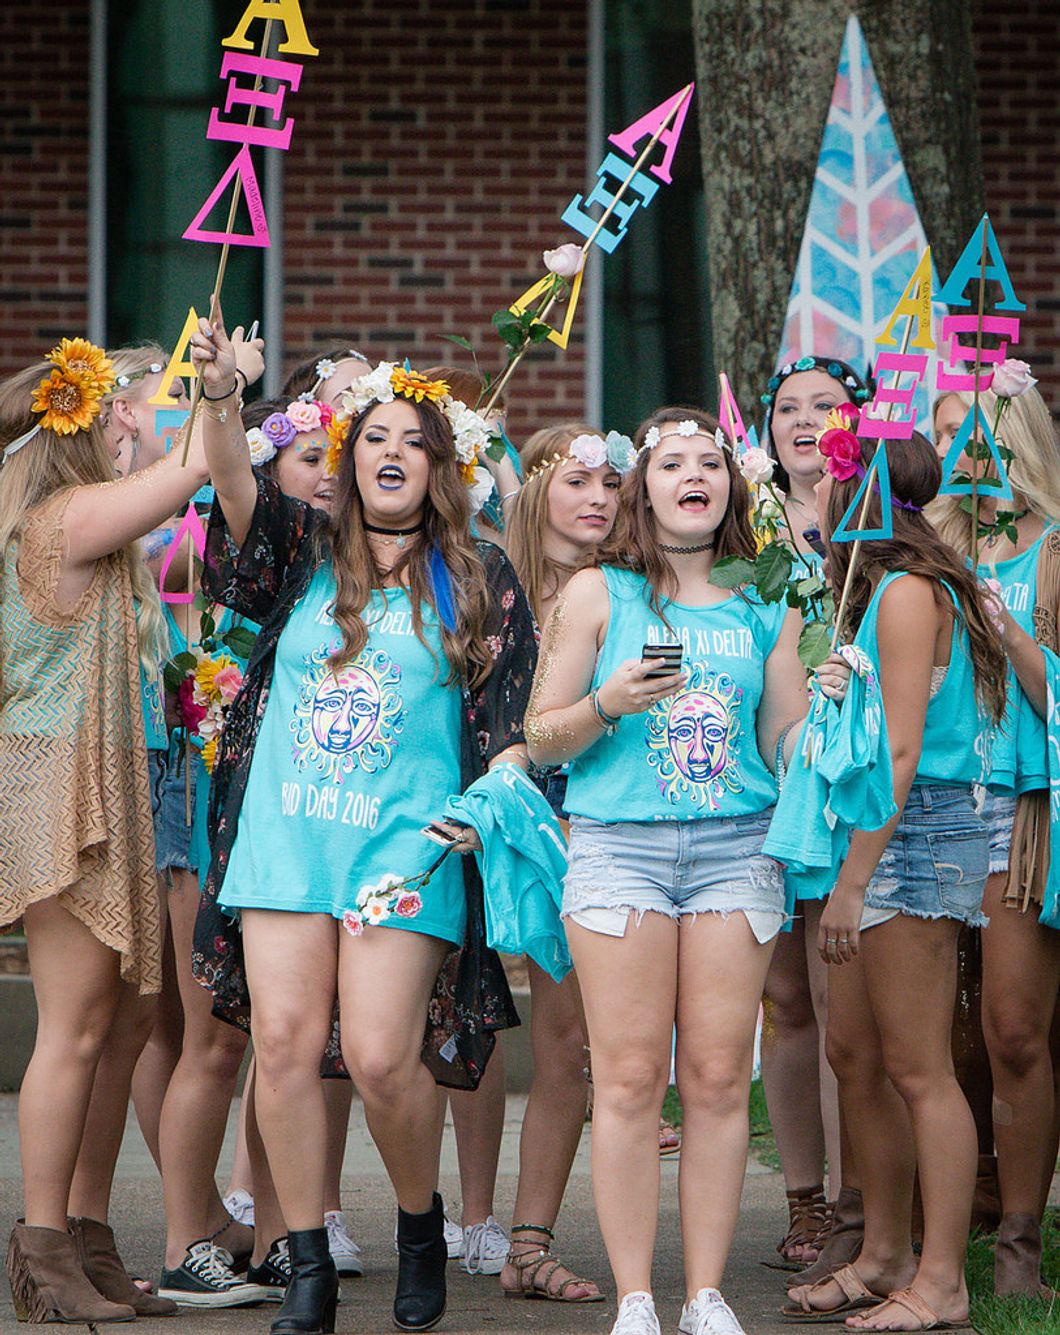 Important Things To remember going through recruitment